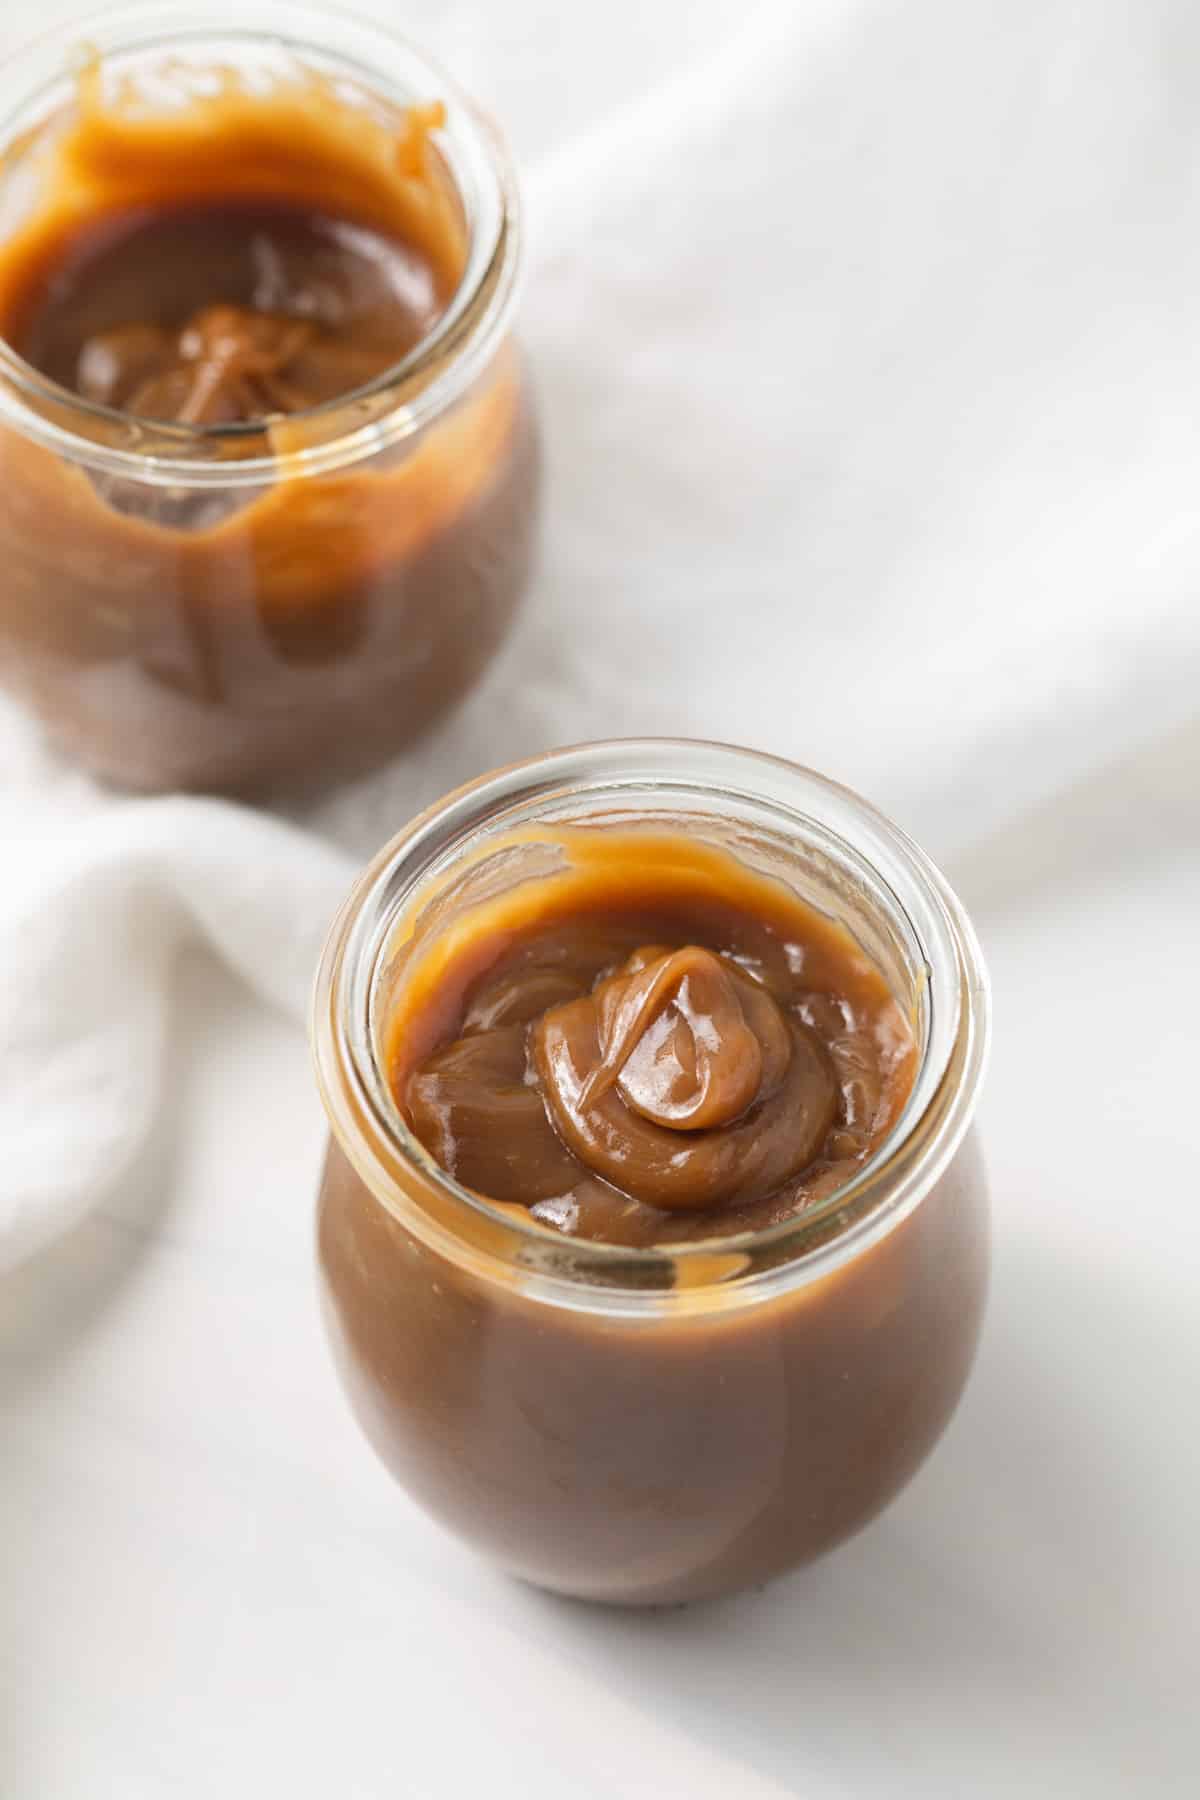 Angled view of butterscotch sauce in glass jar.